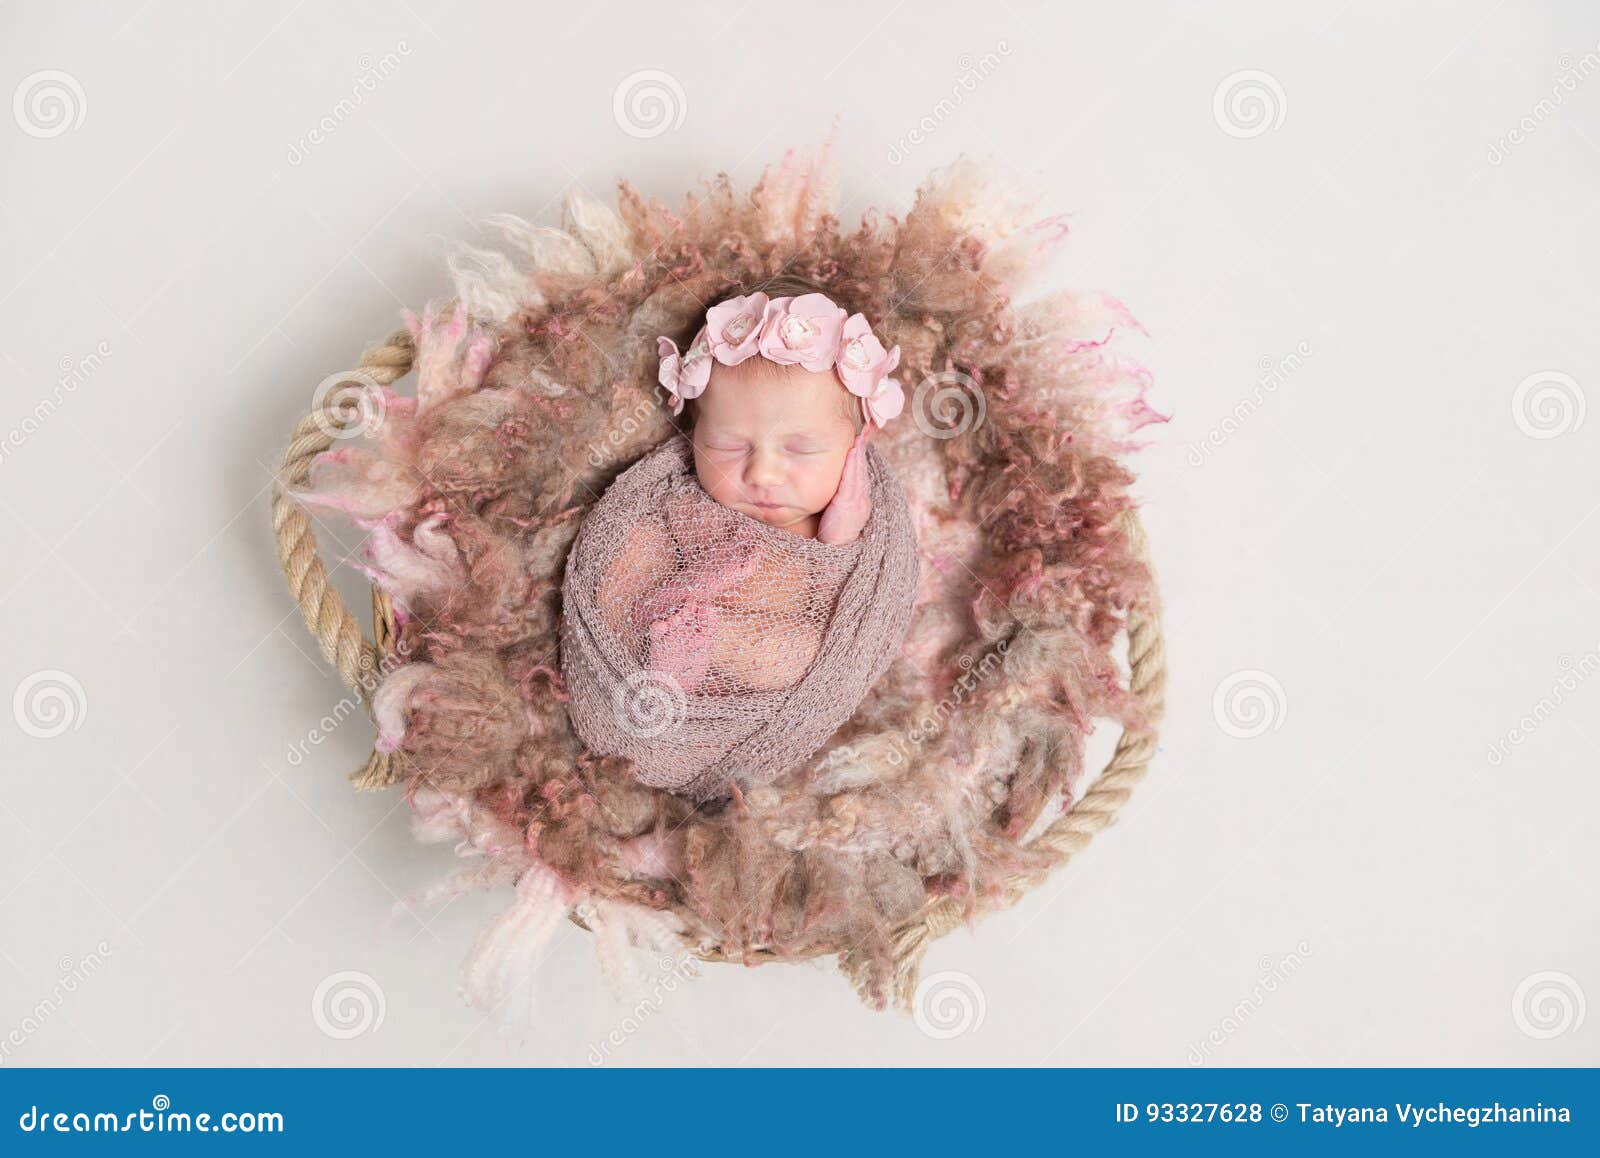 baby in hairband, wrapped in scarf, topview